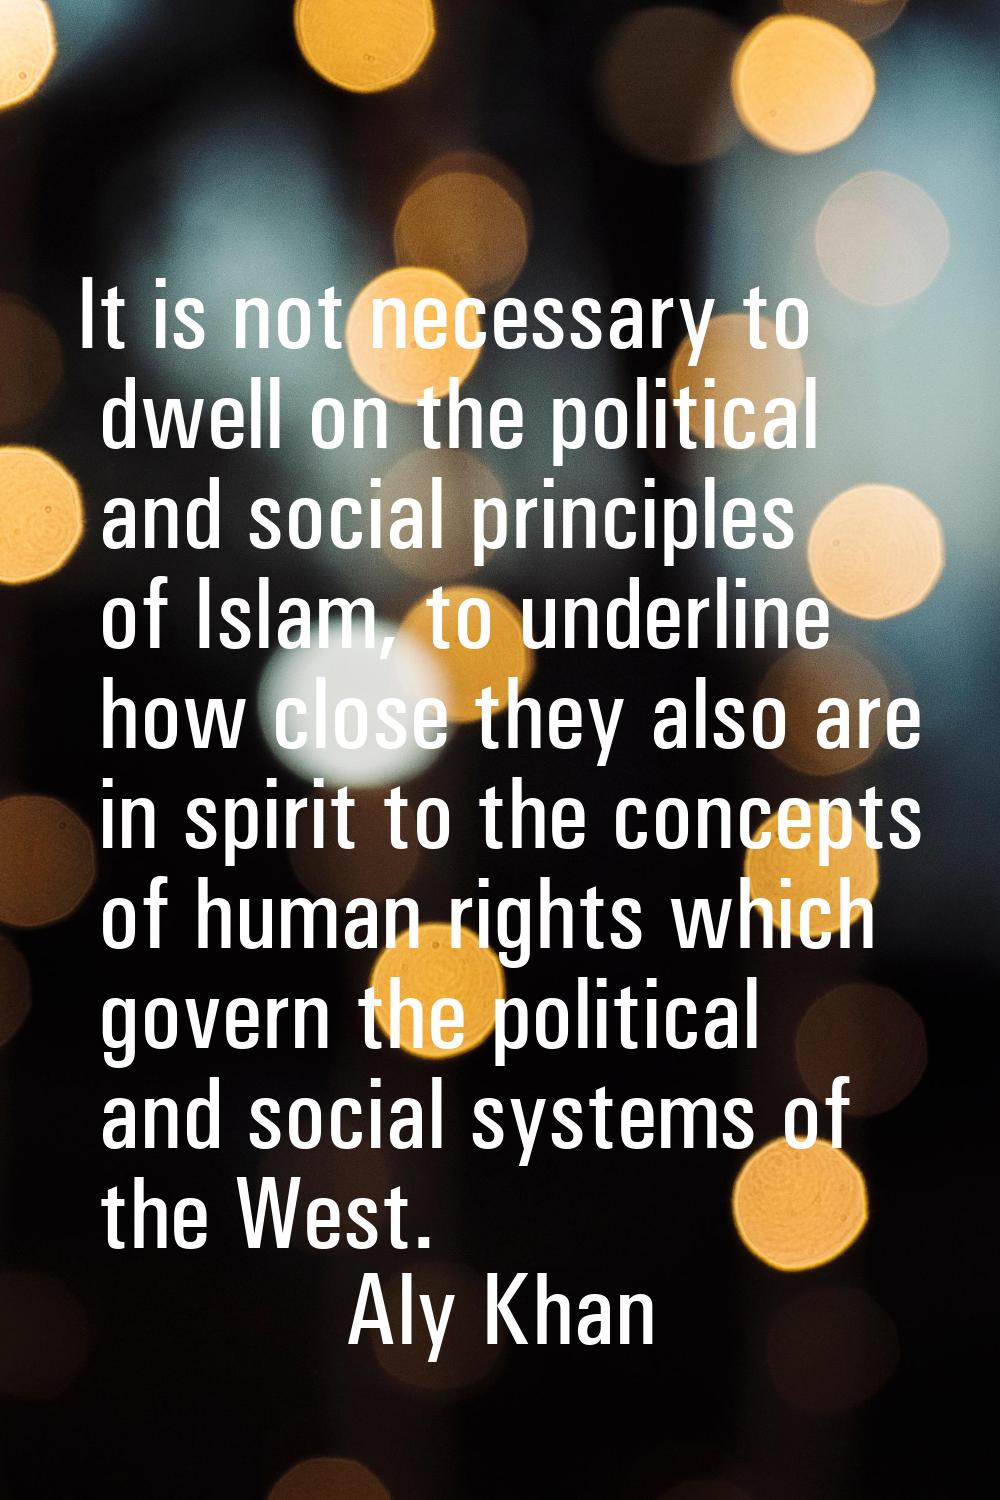 It is not necessary to dwell on the political and social principles of Islam, to underline how clos